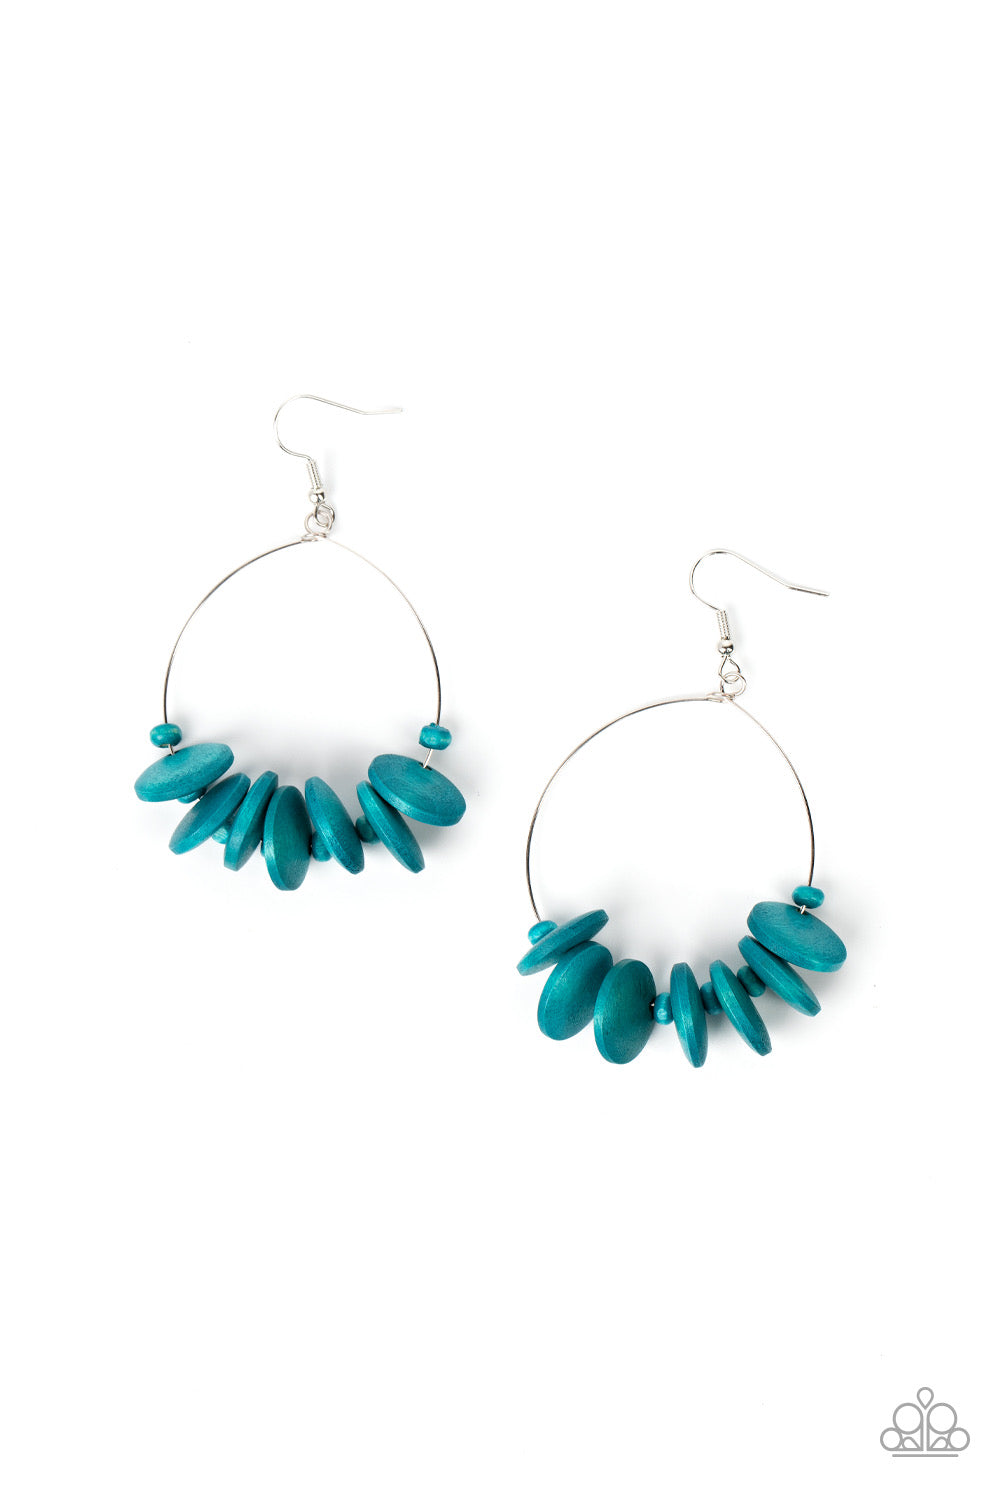 Paparazzi Surf Camp - Blue Earrings -Paparazzi Jewelry Images 